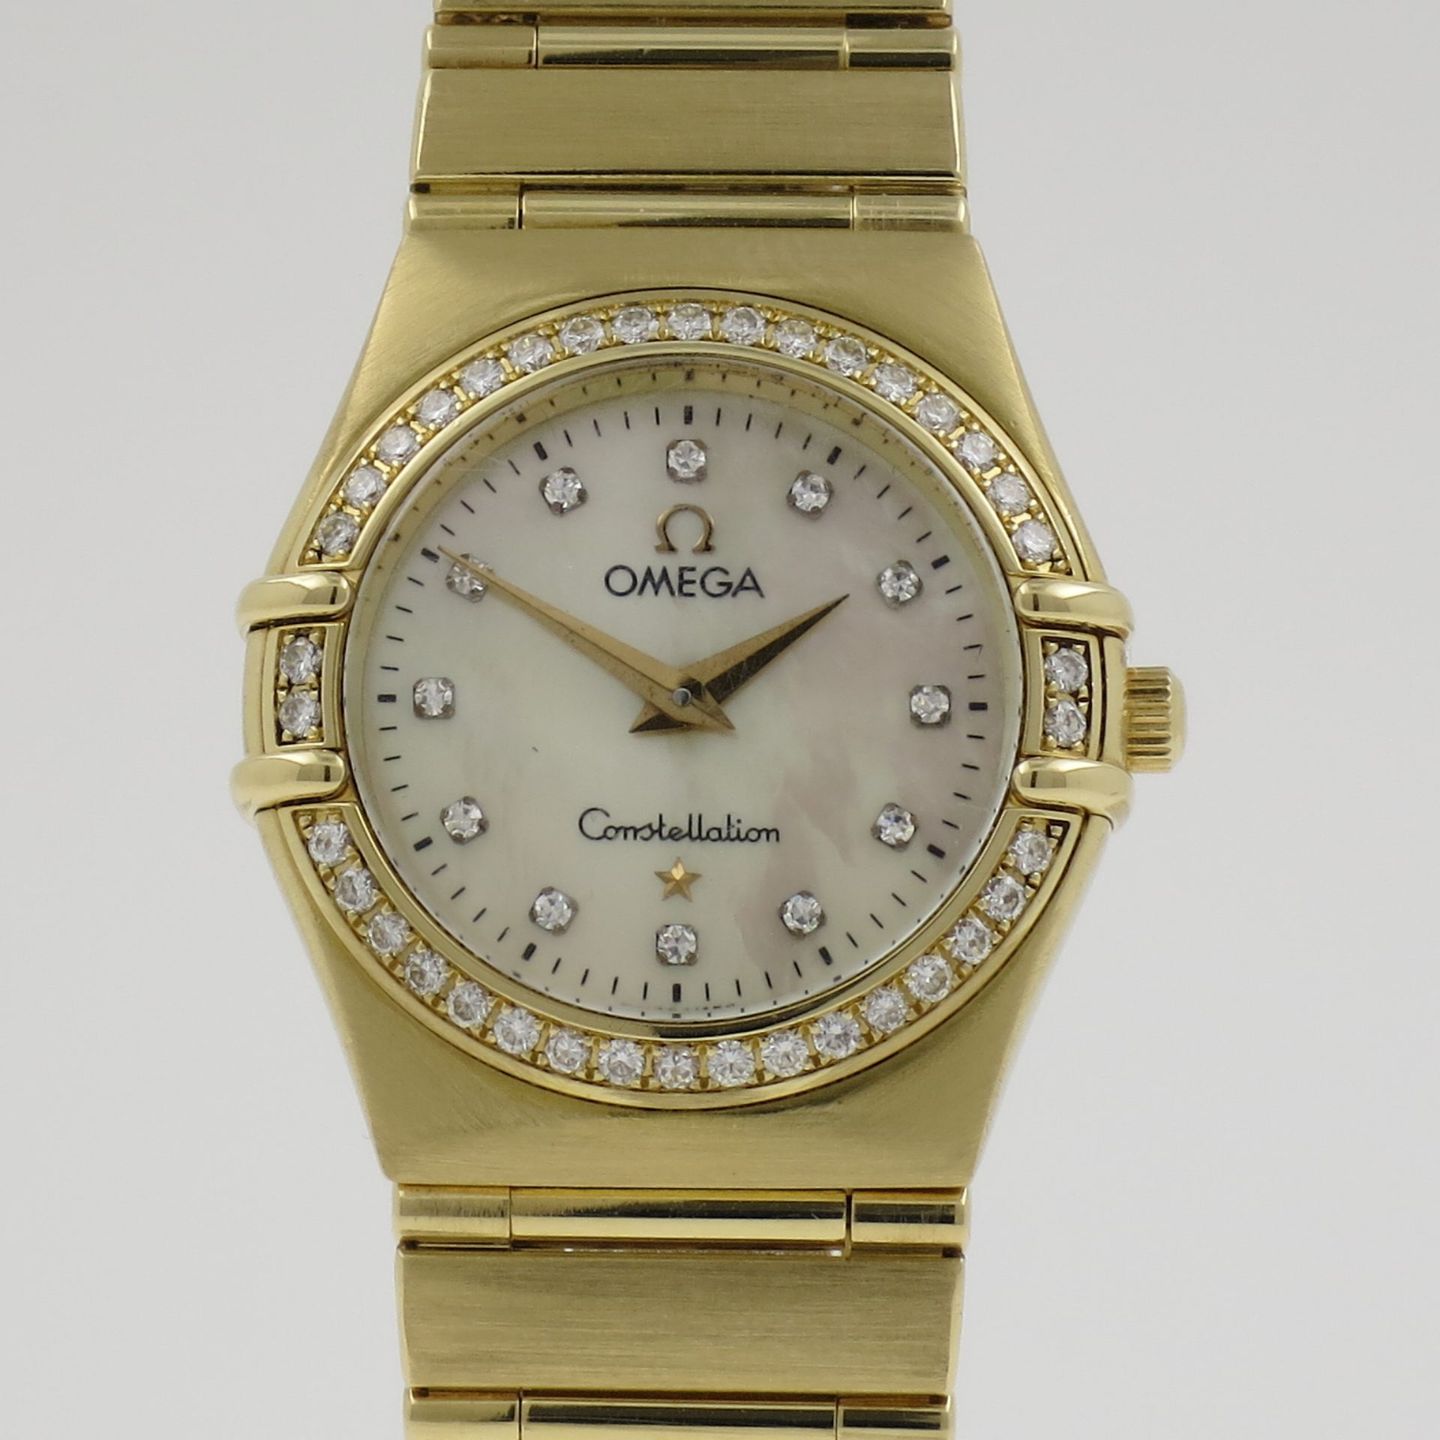 Omega Constellation Quartz 895.1201 (1995) - Pearl dial 26 mm Yellow Gold case (1/4)